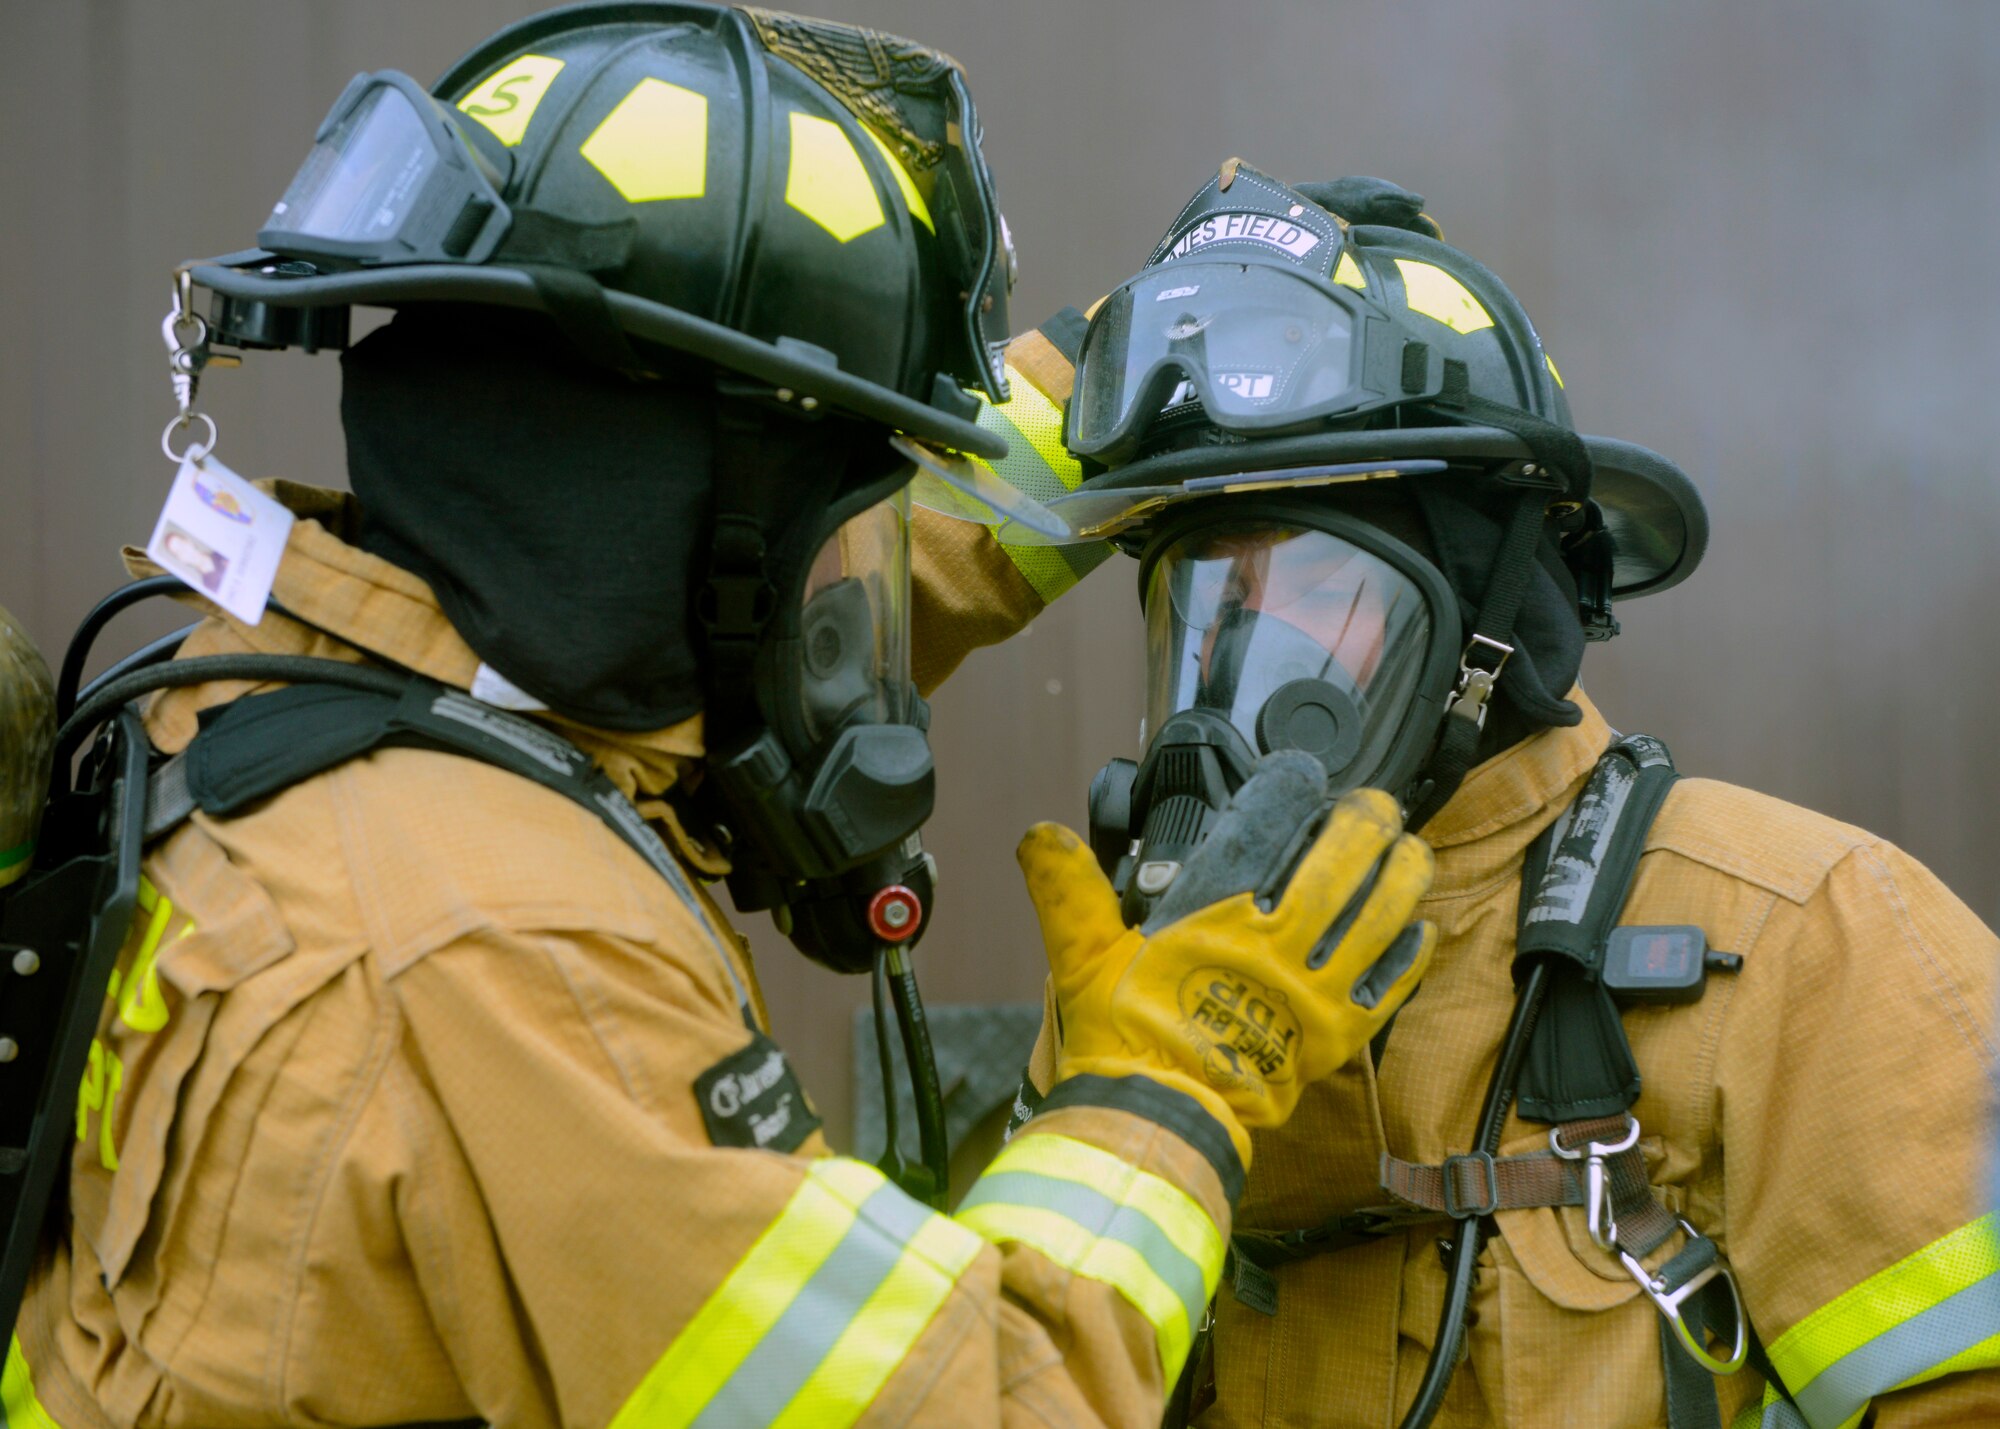 Firefighters from the 65th Civil Engineer Squadron test the seal of their oxygen masks before combatting a structural fire at their training facility on Lajes Field, Azores, Feb. 6, 2016. The training was designed to prepare newly hired Portuguese locals. Lajes Field, operated by the 65th Air Base Group, became a geographically separated unit of the 86th Airlift Wing in August, 2015. (U.S. Air Force photo/Tech. Sgt. Kristopher Levasseur)